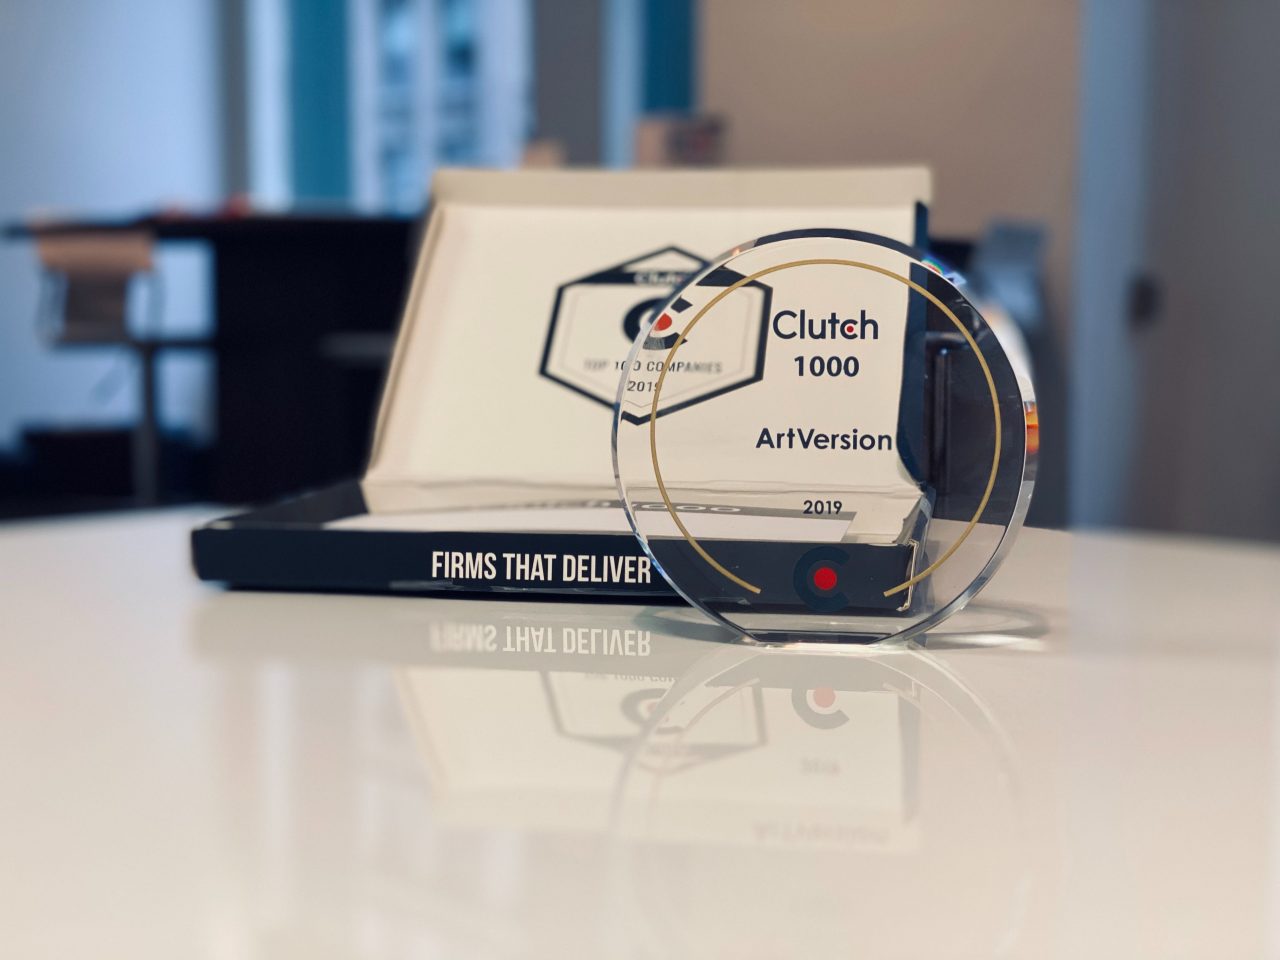 ArtVersion awarded as global leader in Creative & Design industries by Clutch.co